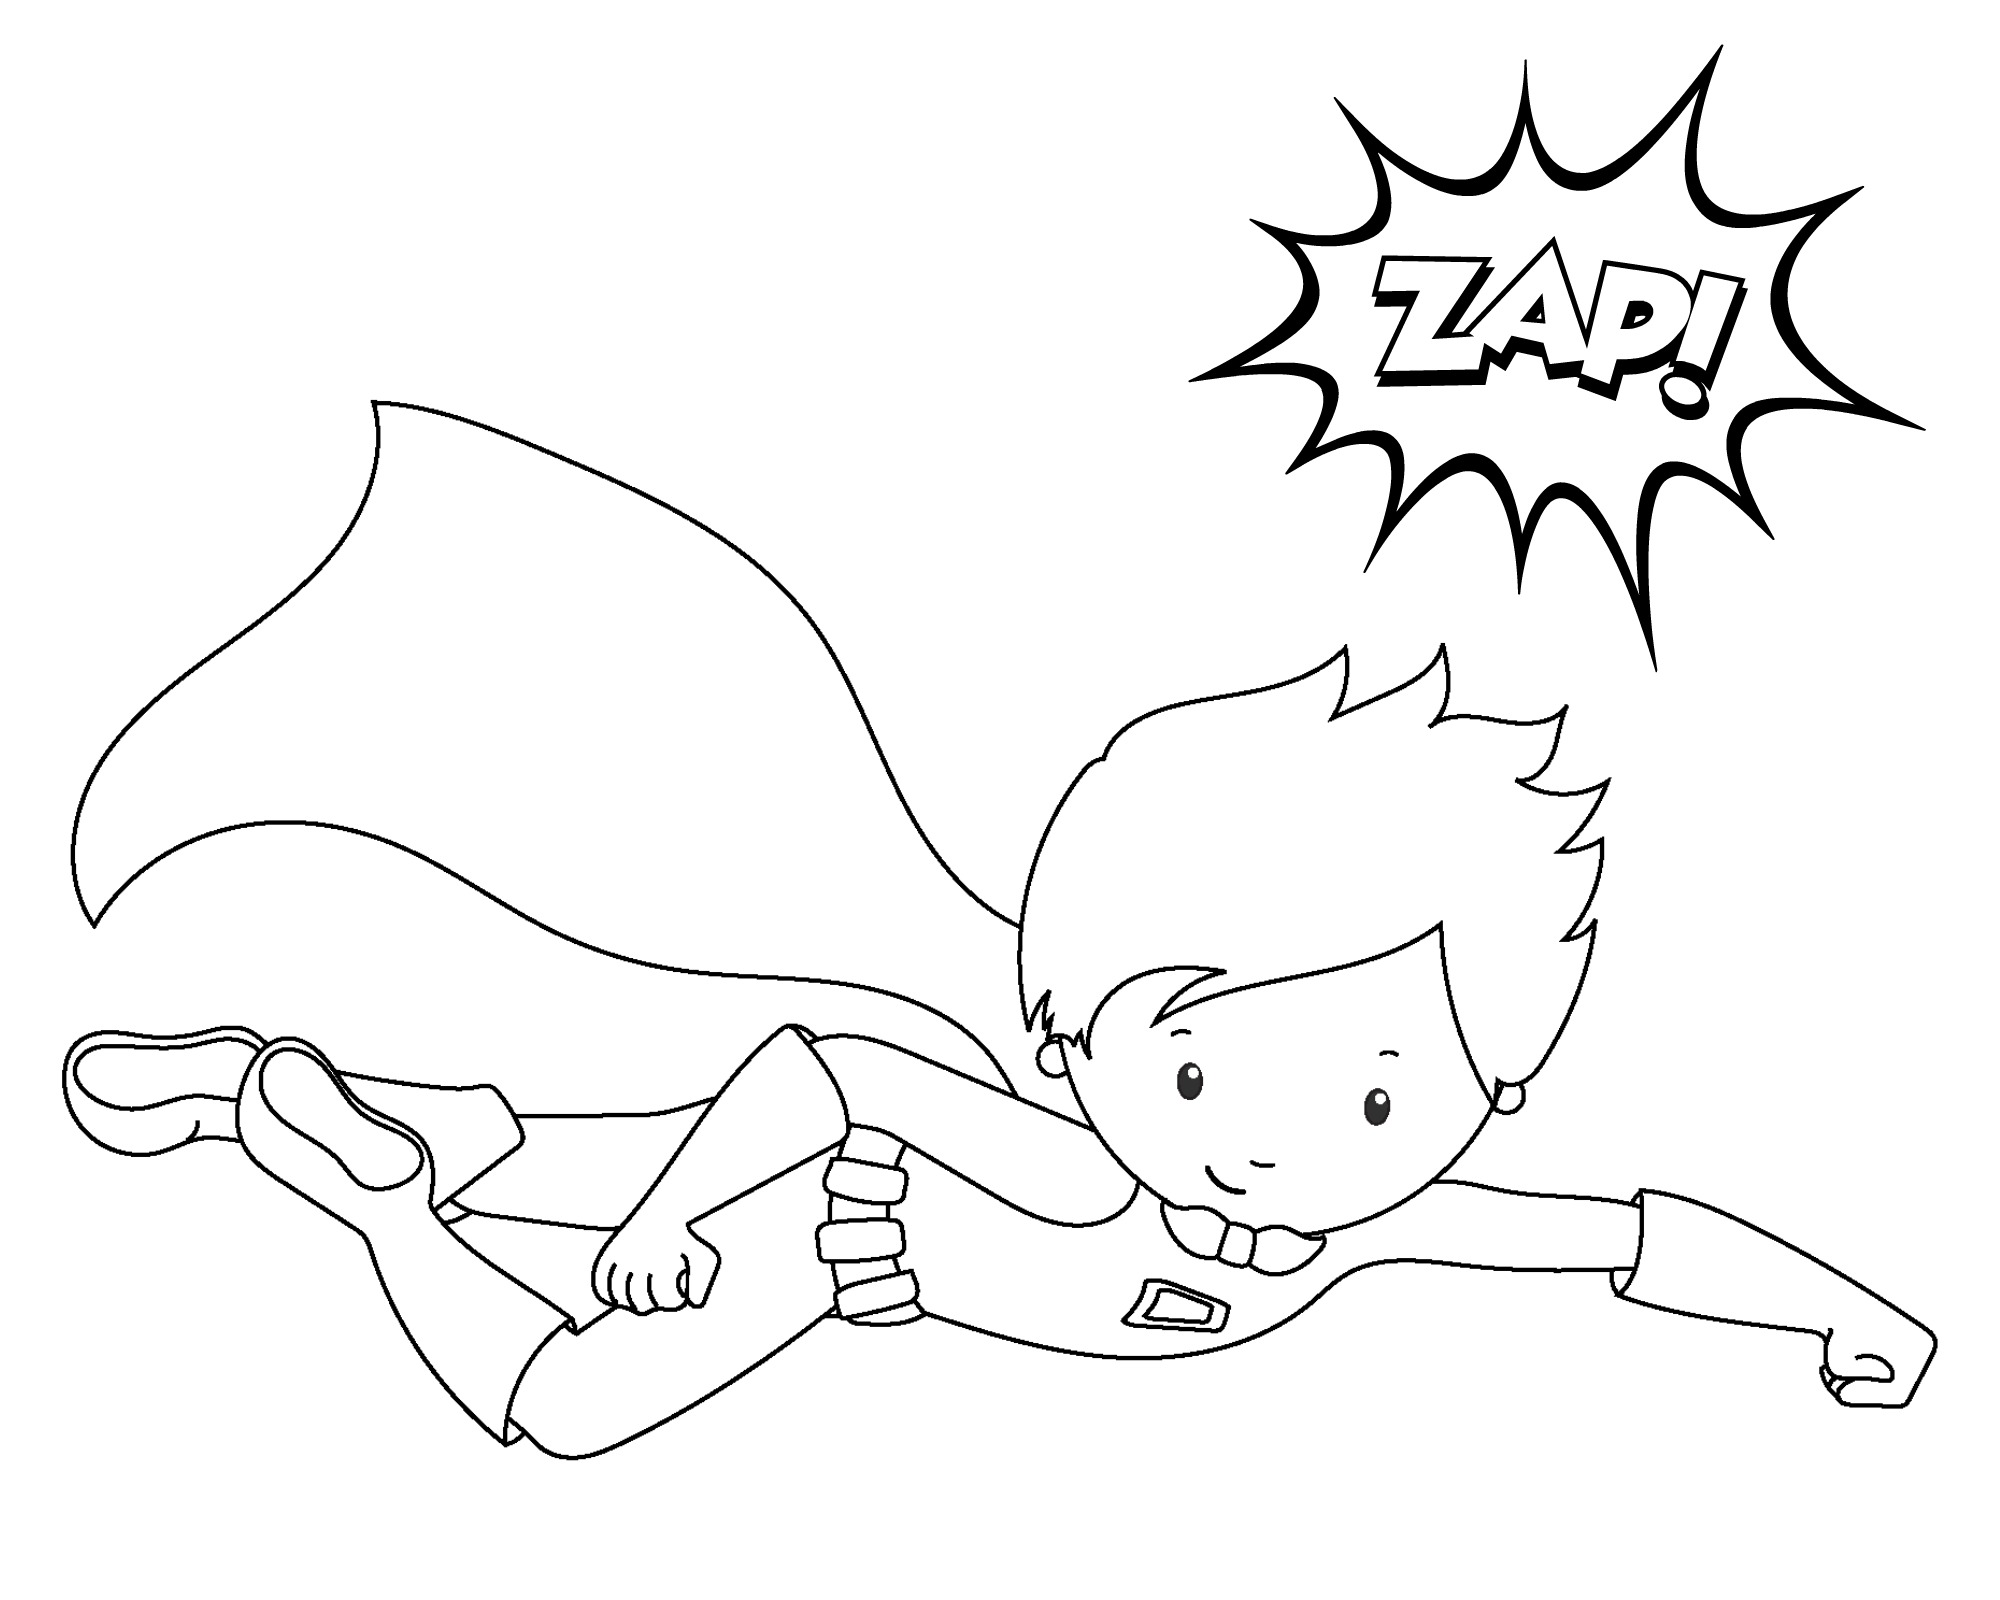 easy superhero coloring pages